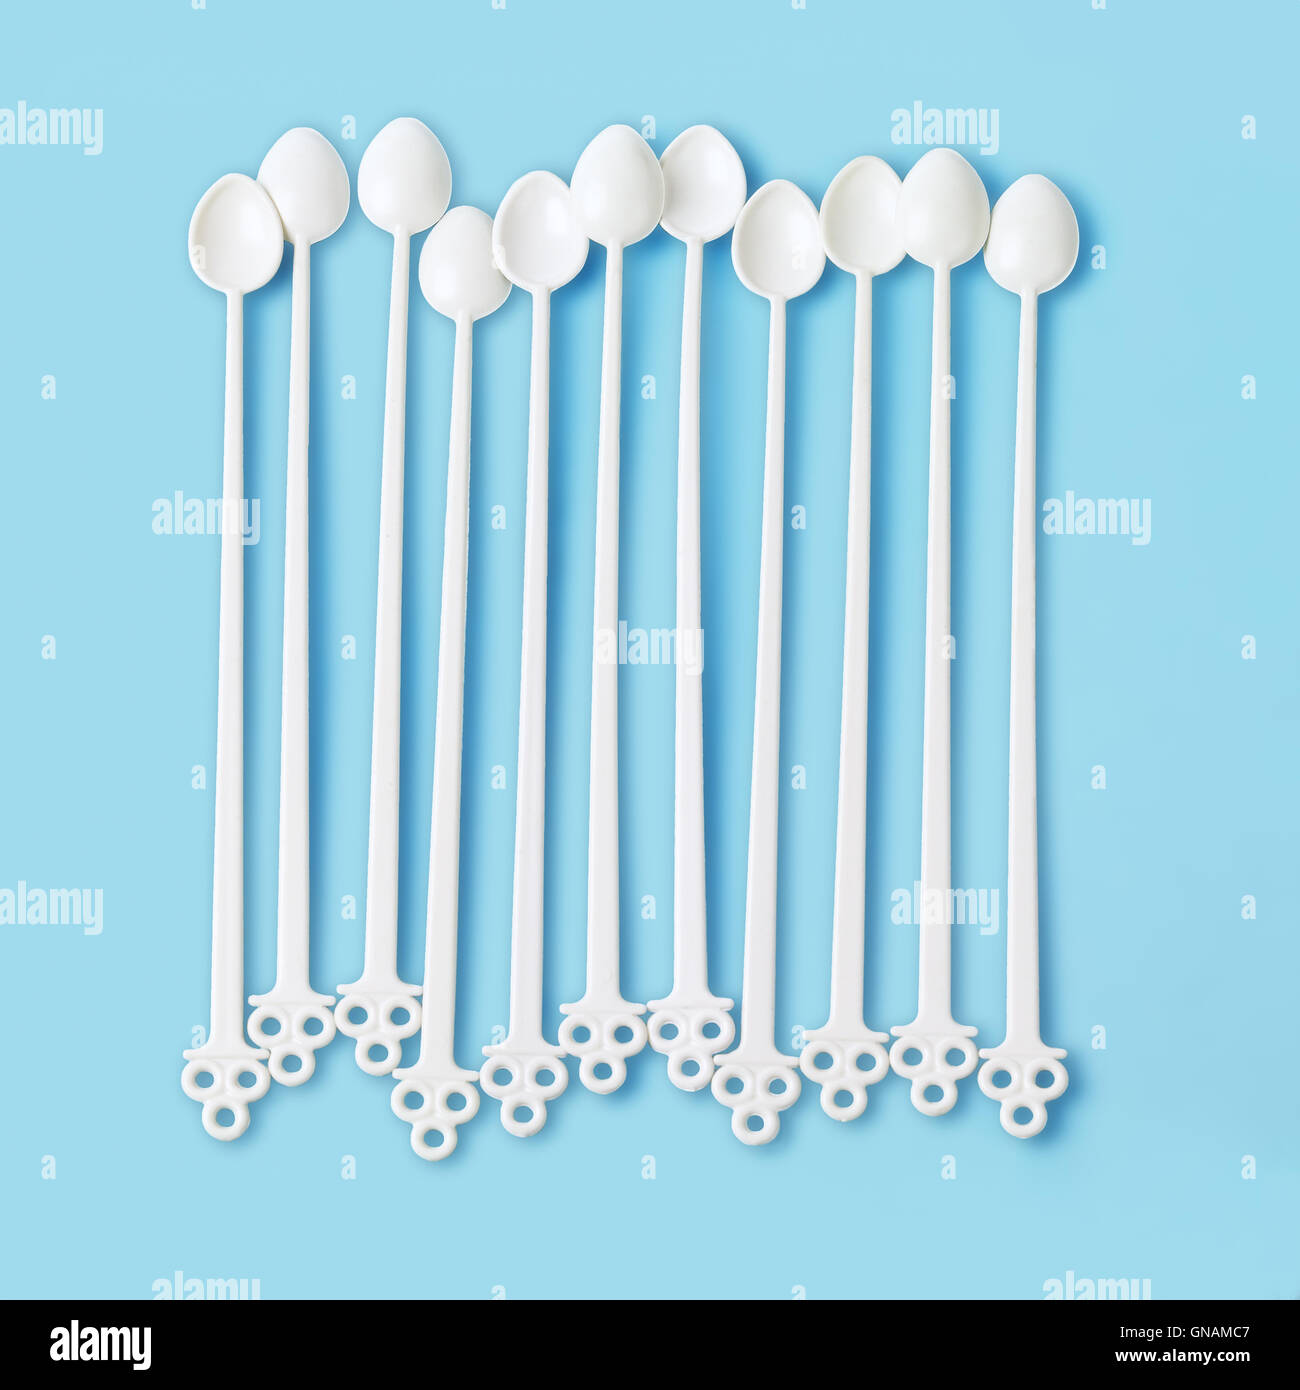 Row of Disposable Plastic Stirrers on Blue Background Stock Photo